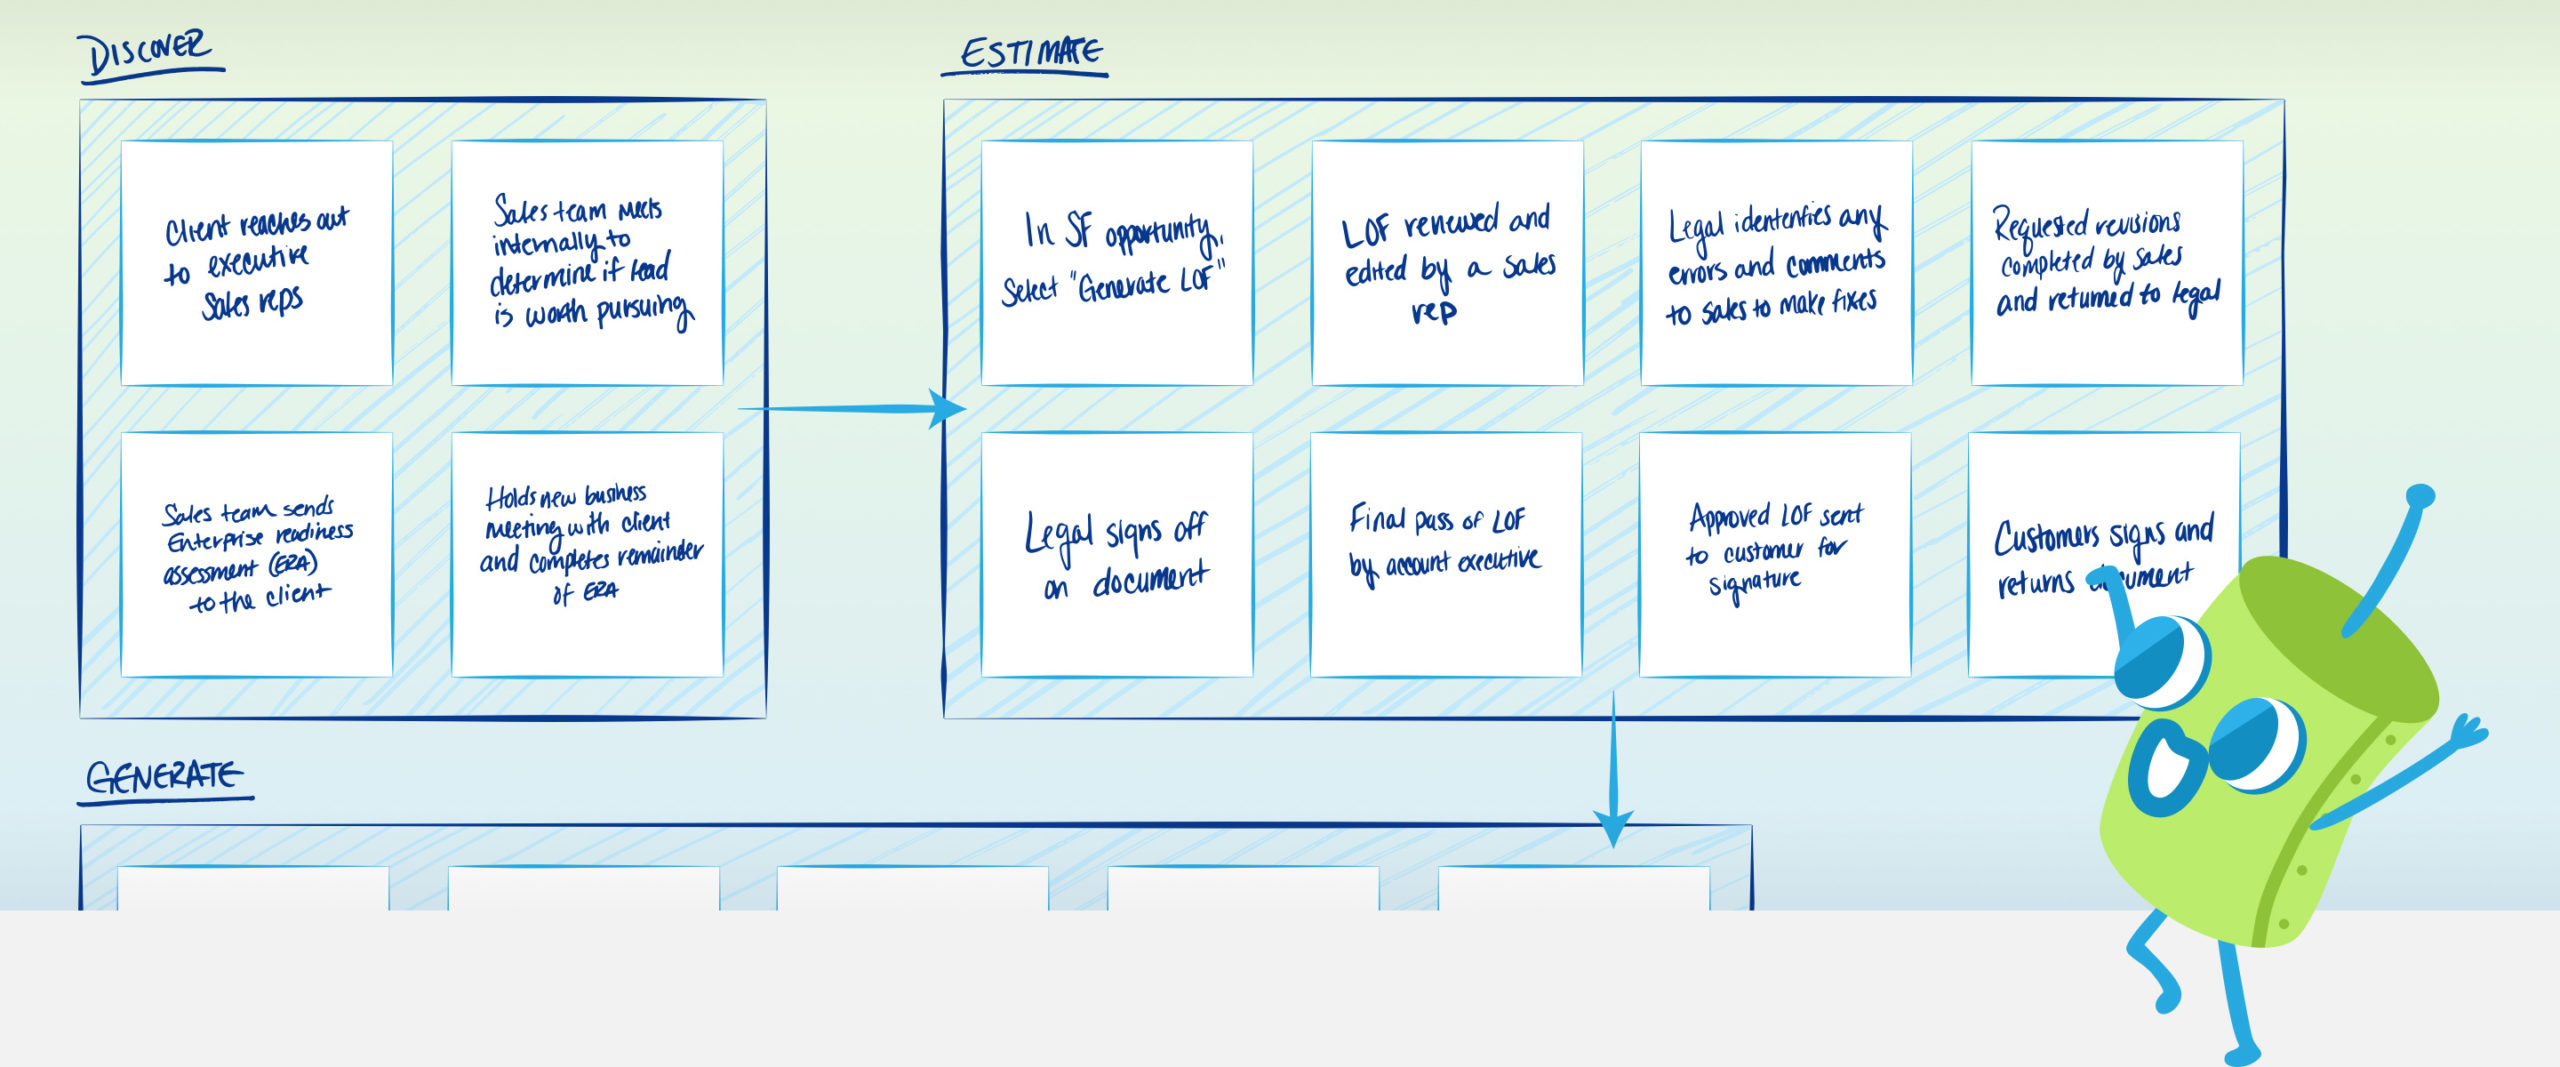 Mapping of the Salesforce user experience, done as part of our Salesforce CPQ services